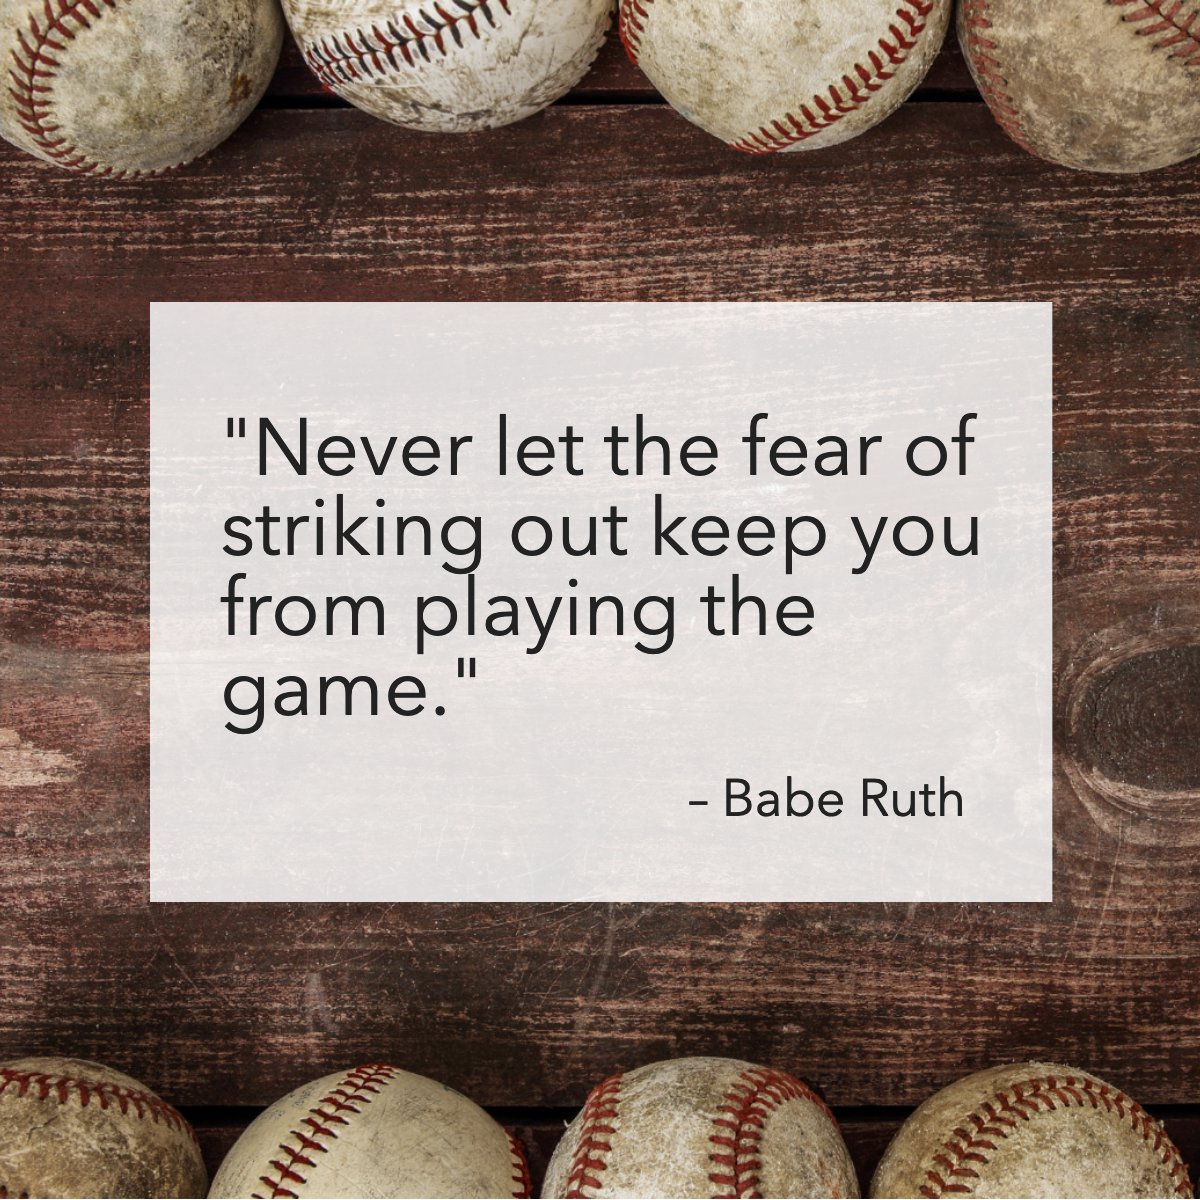 I guess we just have to keep playing! 🙏

Share with us a motivational quote! 💭

#inspiring    #motivation    #sports    #baseball    #baberuth    #quote
#hortenciamoreno #homesbyhortencia #coldwellbankerrealty #northwestindiana